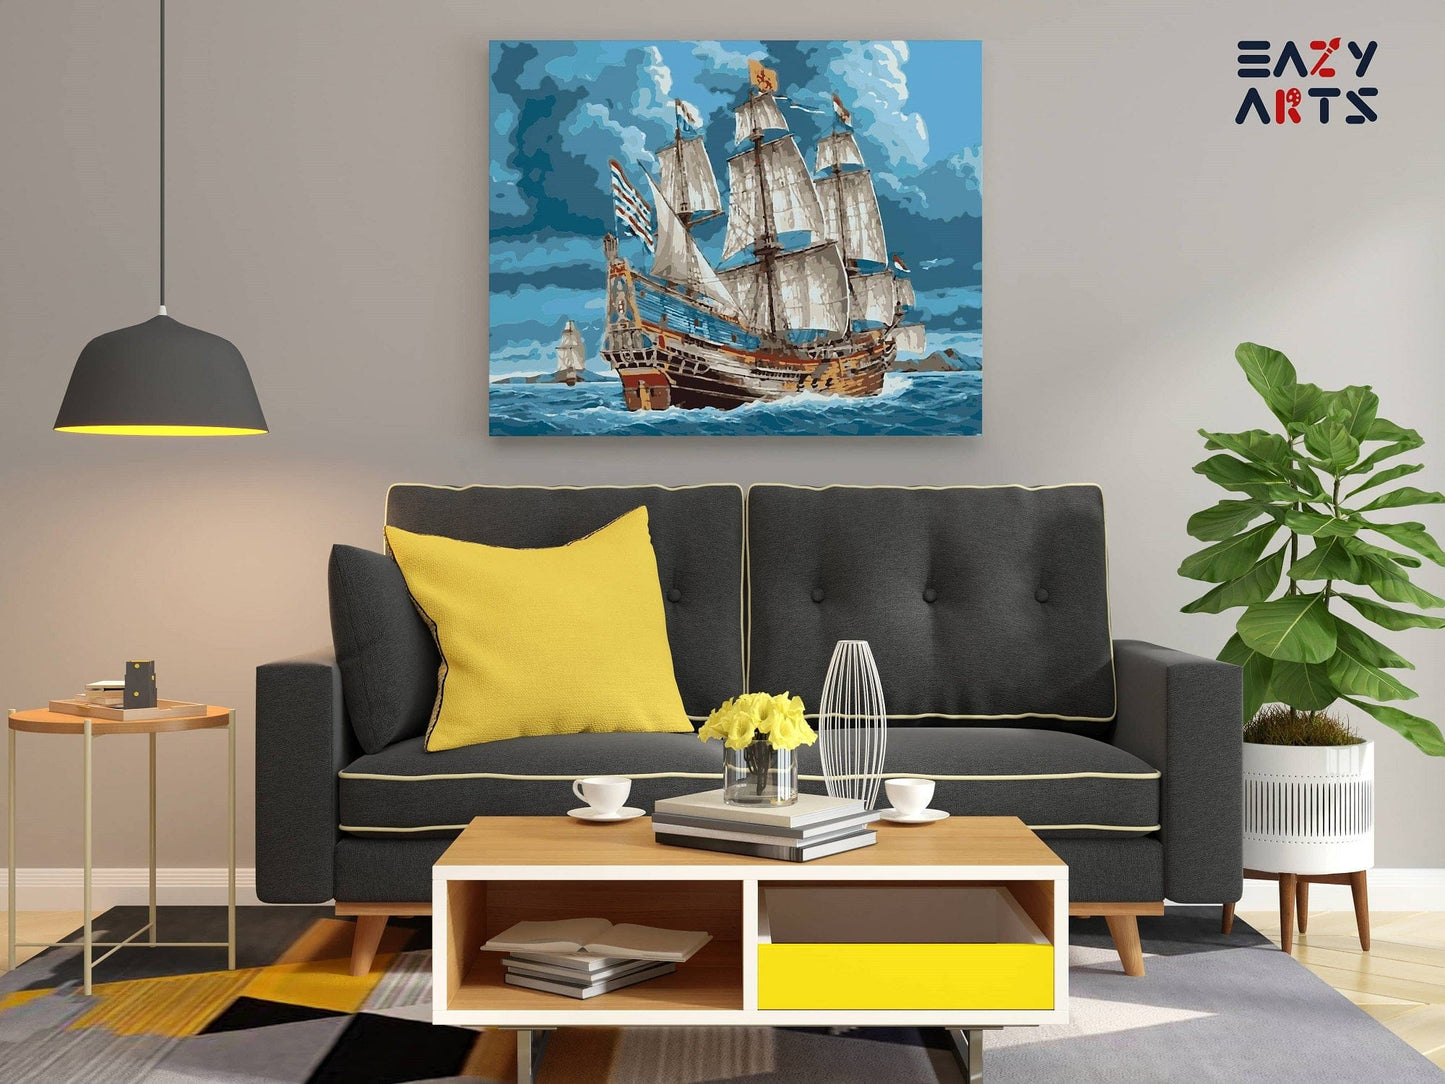 Pirate Ship In Ocean paint by numbers kit